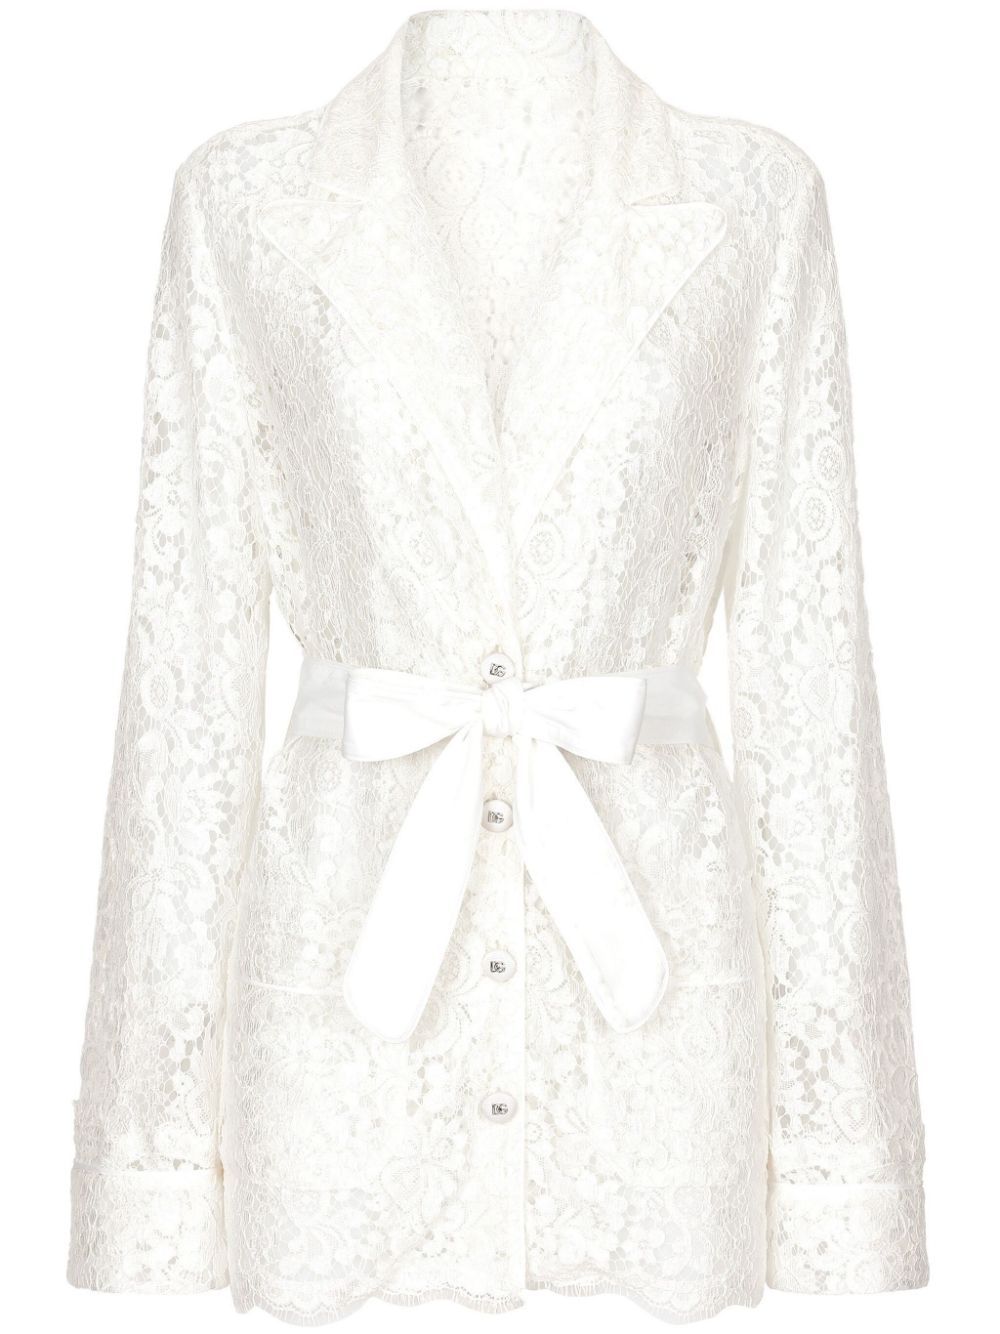 DOLCE & GABBANA FLORAL-LACE BELTED SHIRT